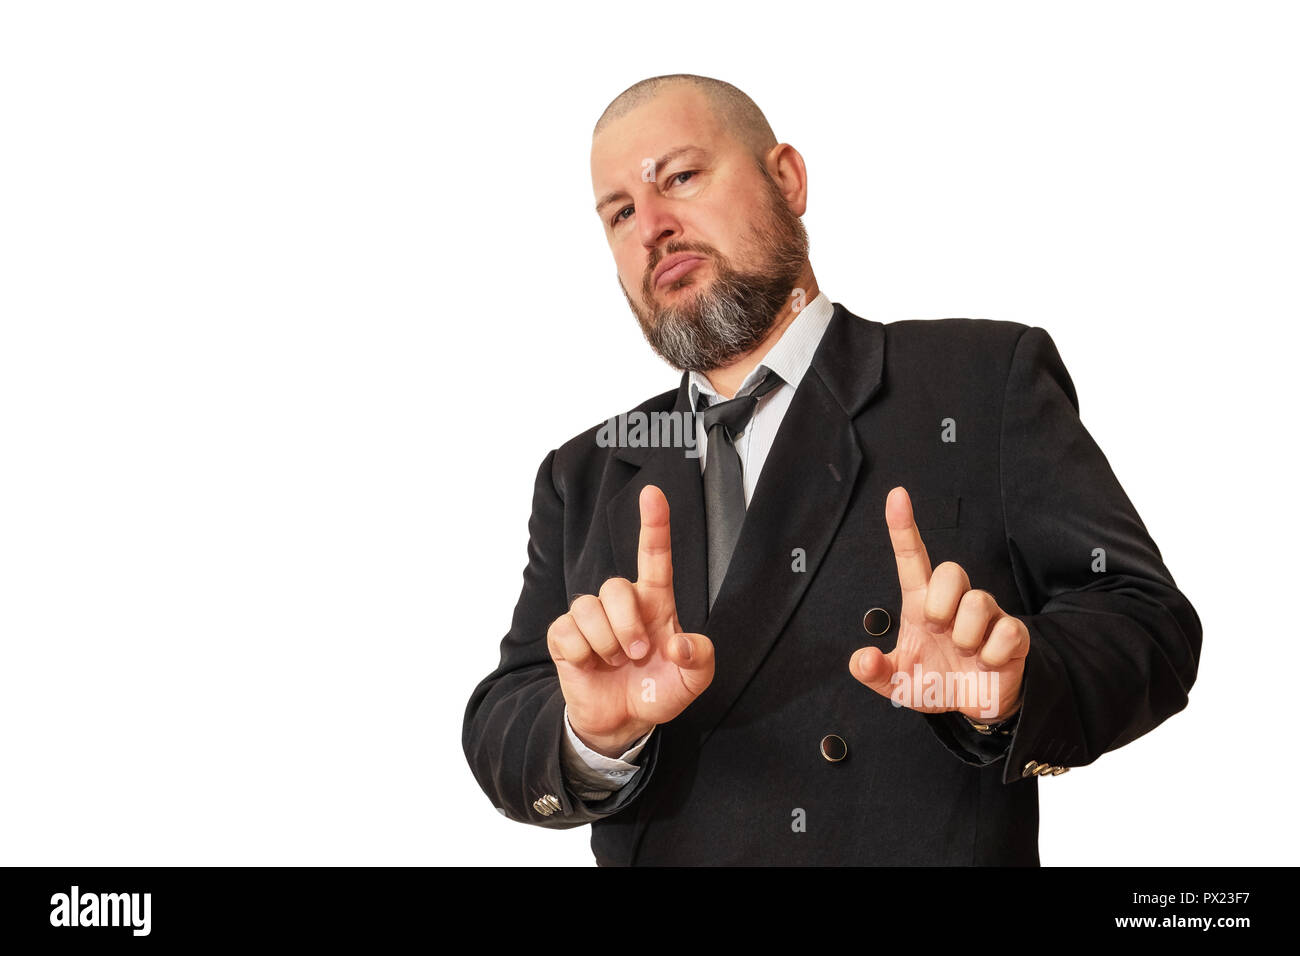 Respectable man emotionally demonstrates rejection and shows it with his hands. Stock Photo